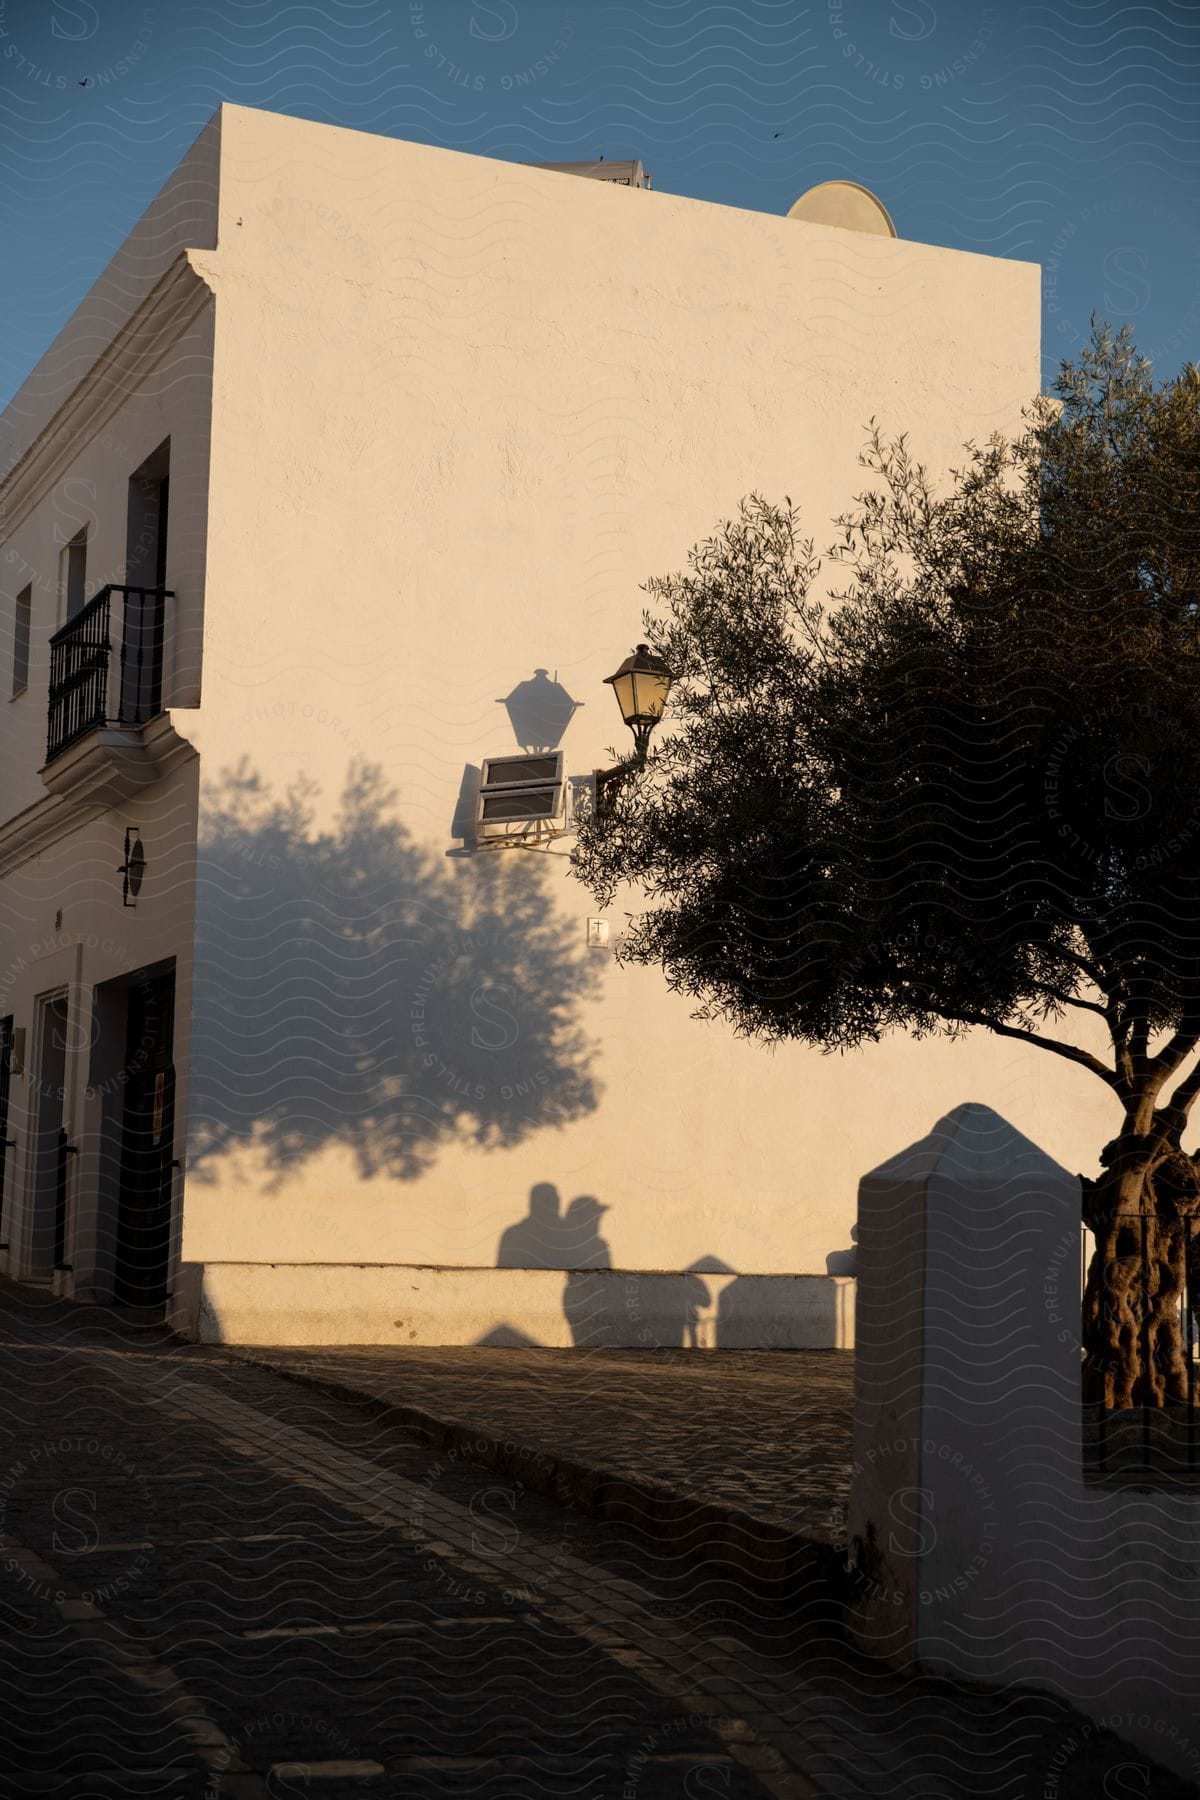 The shadow of a tree is cast on a white building's wall at dusk.